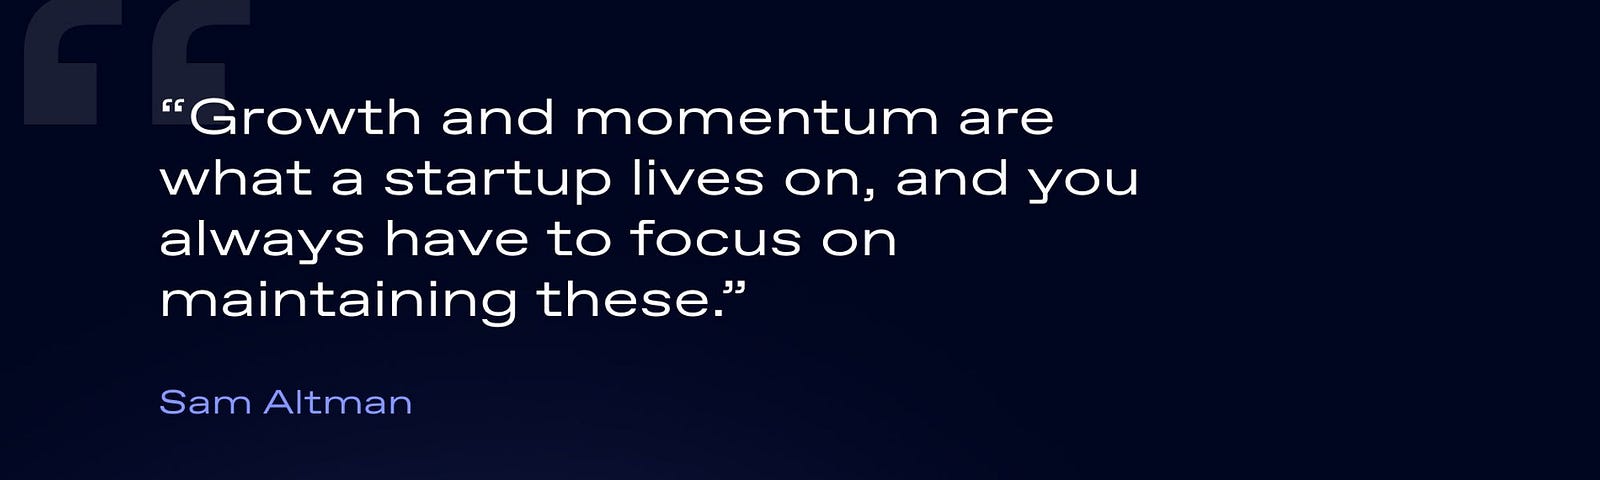 Quote about momentum by Sam Altman: Growth and momentum are what a startup live son, and you always have to focus on maintaining these.